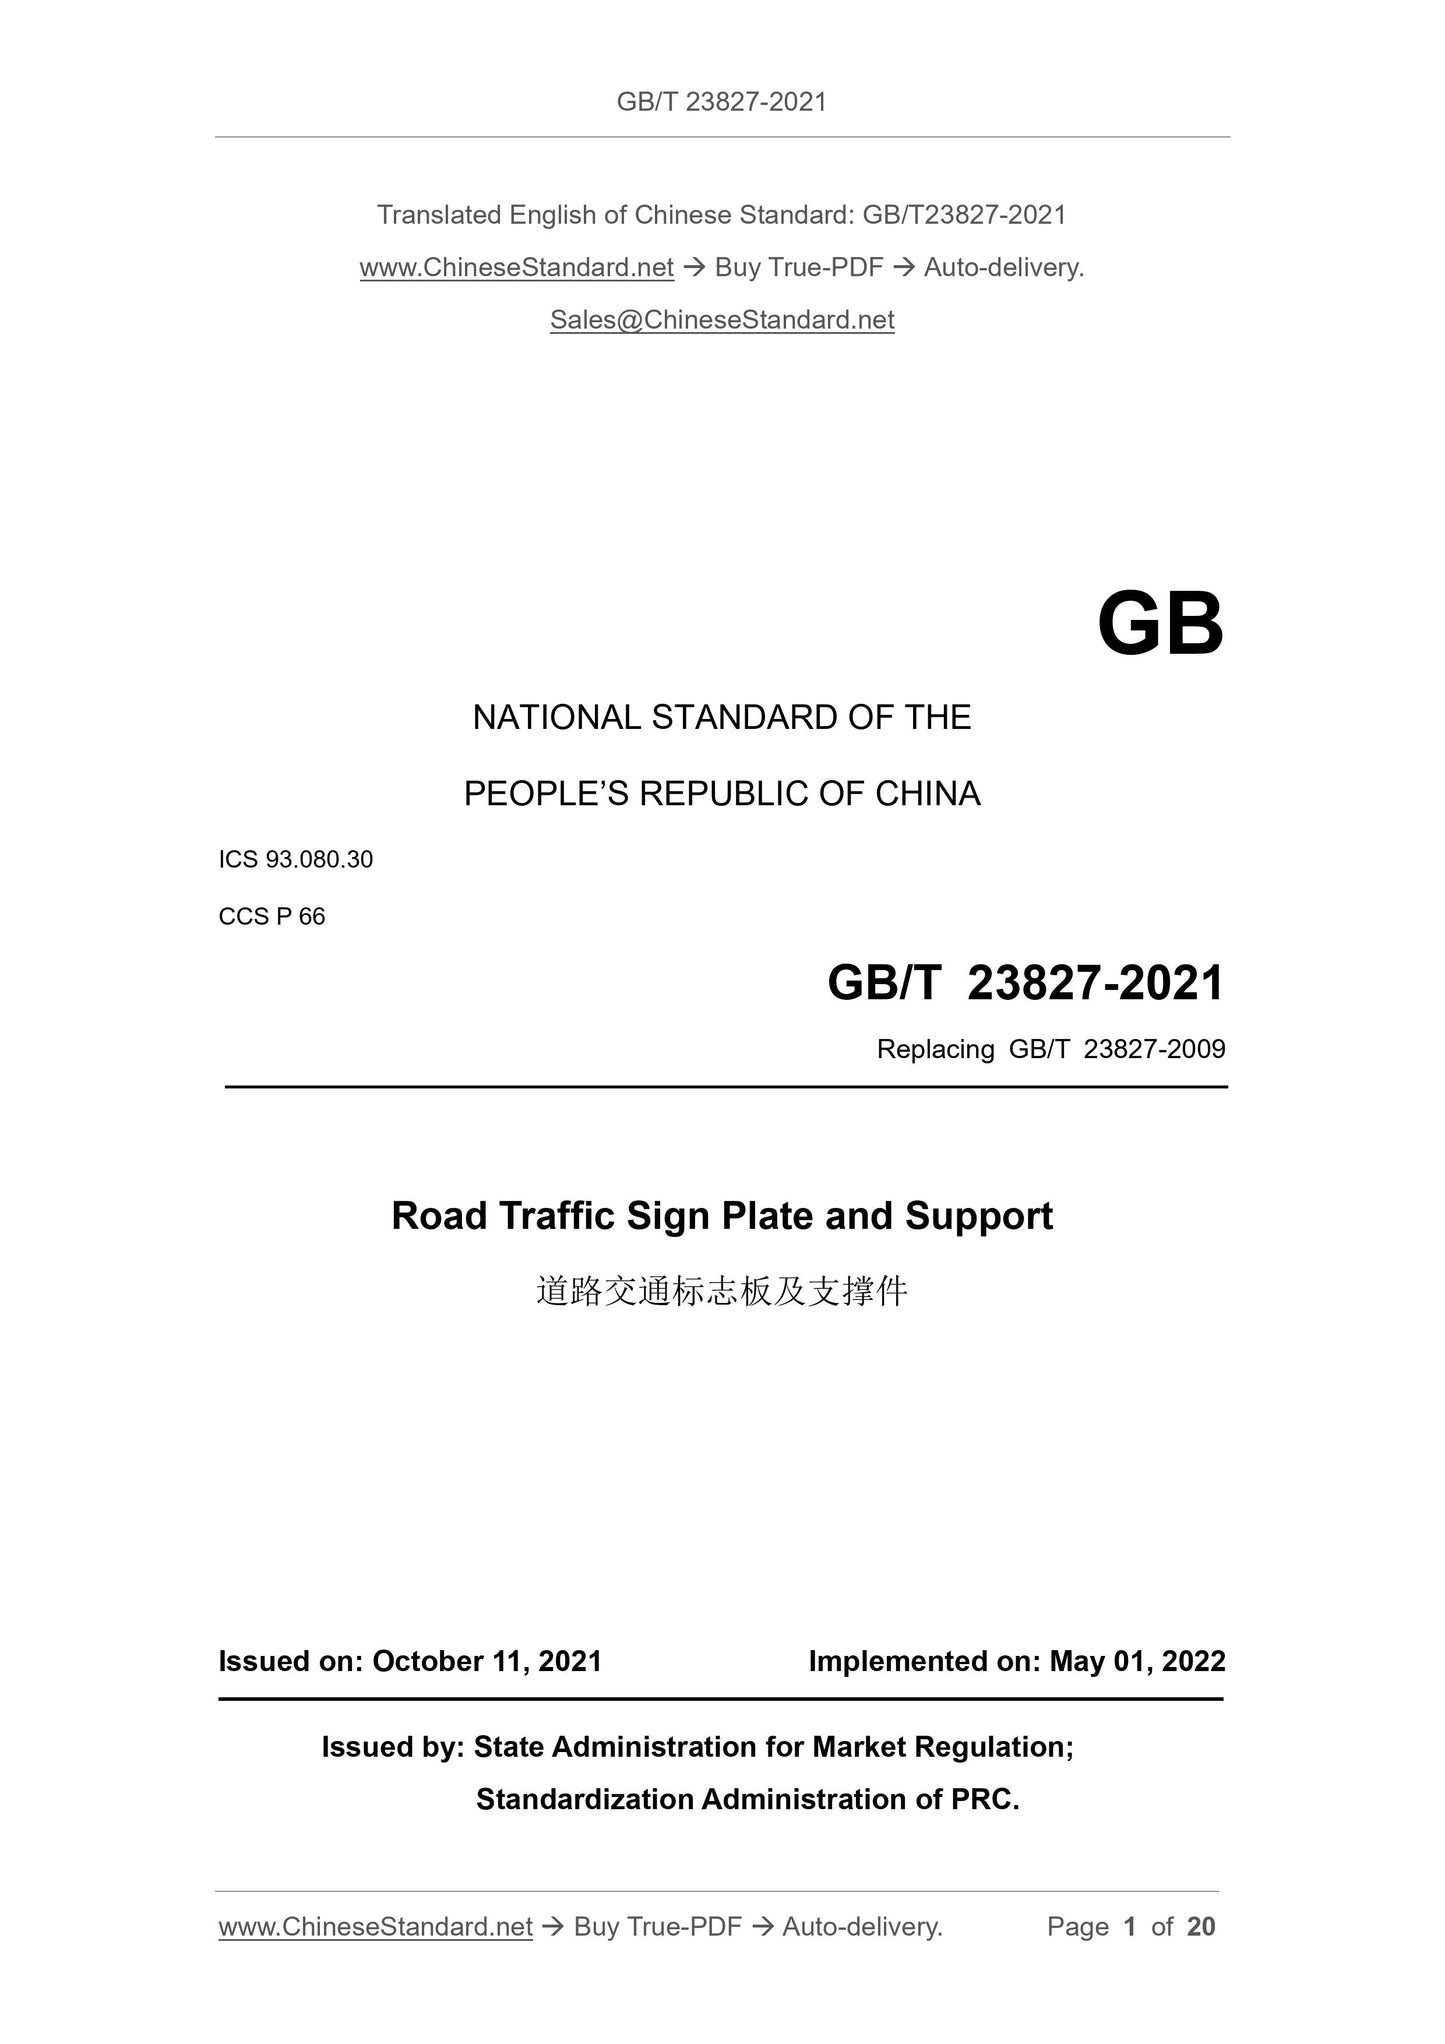 GB/T 23827-2021 Page 1